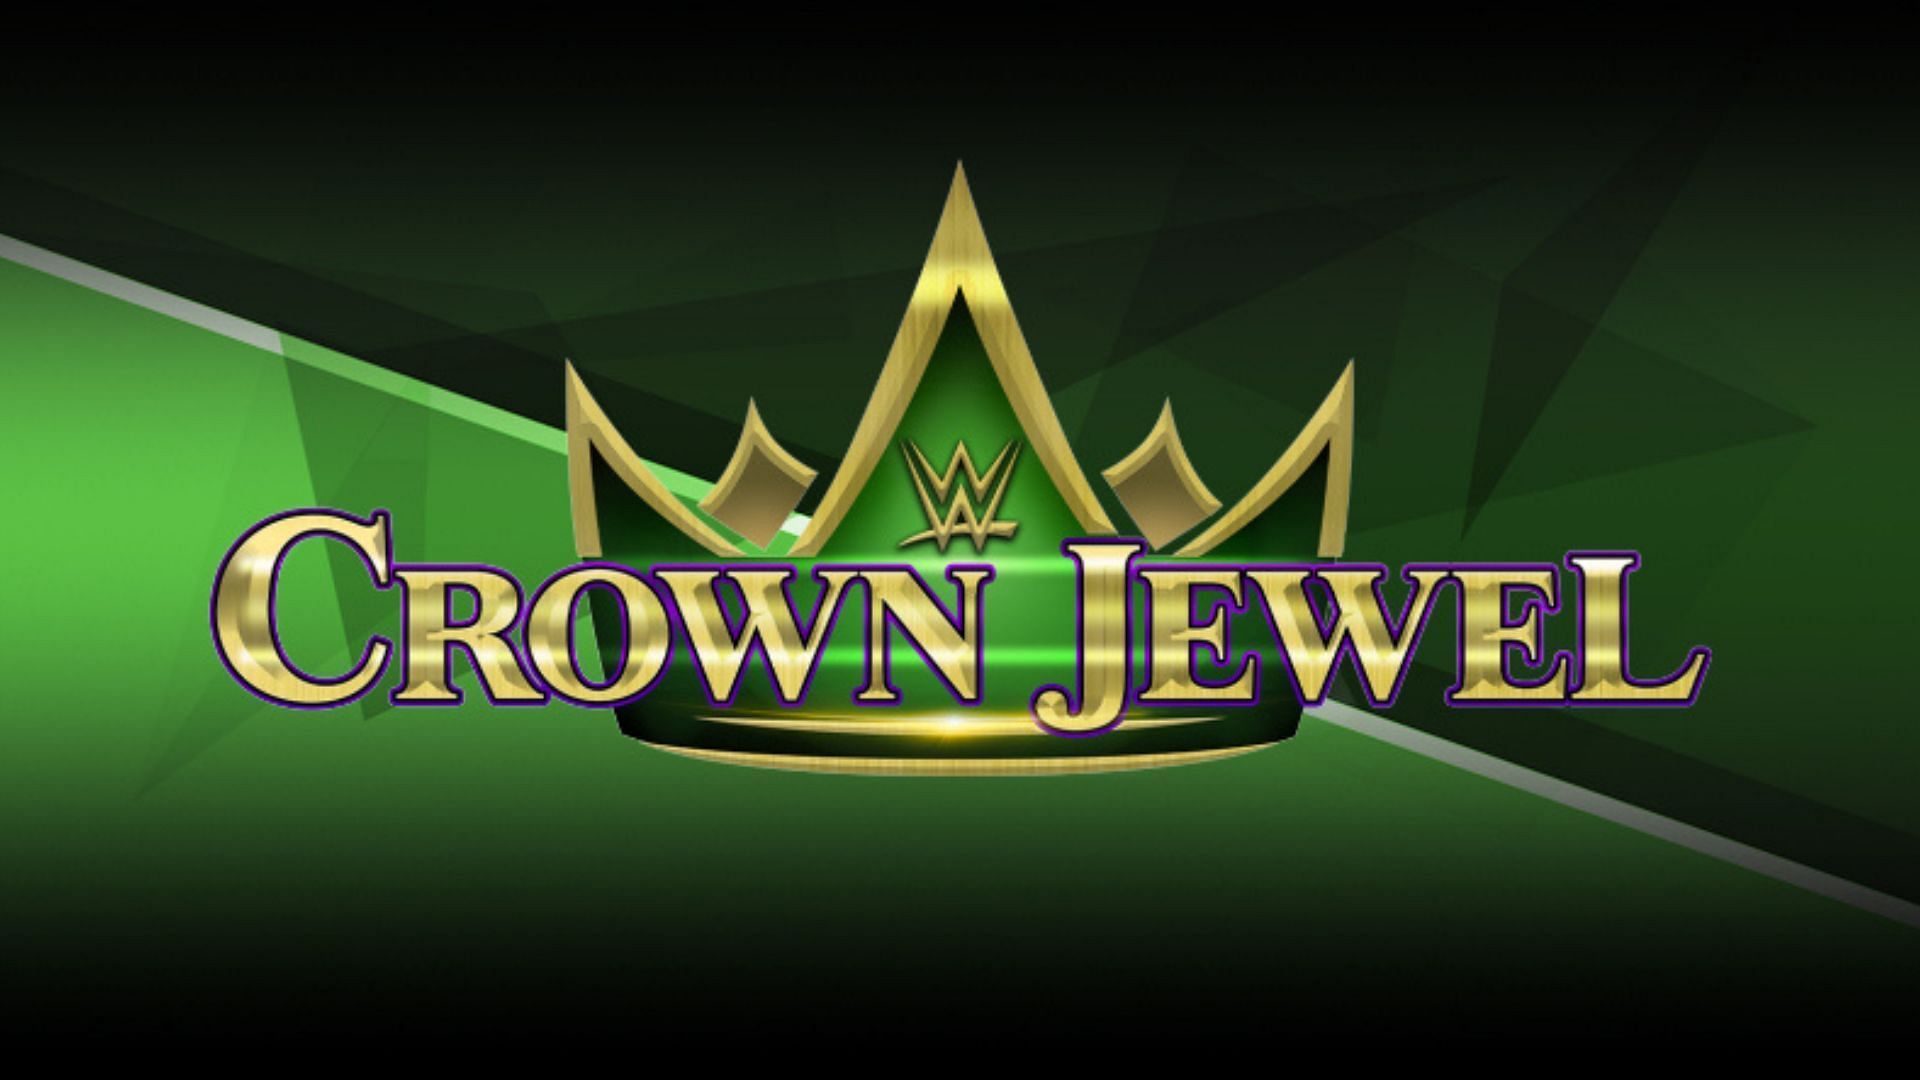 WWE Crown Jewel is set to air this Saturday live from Saudi Arabia